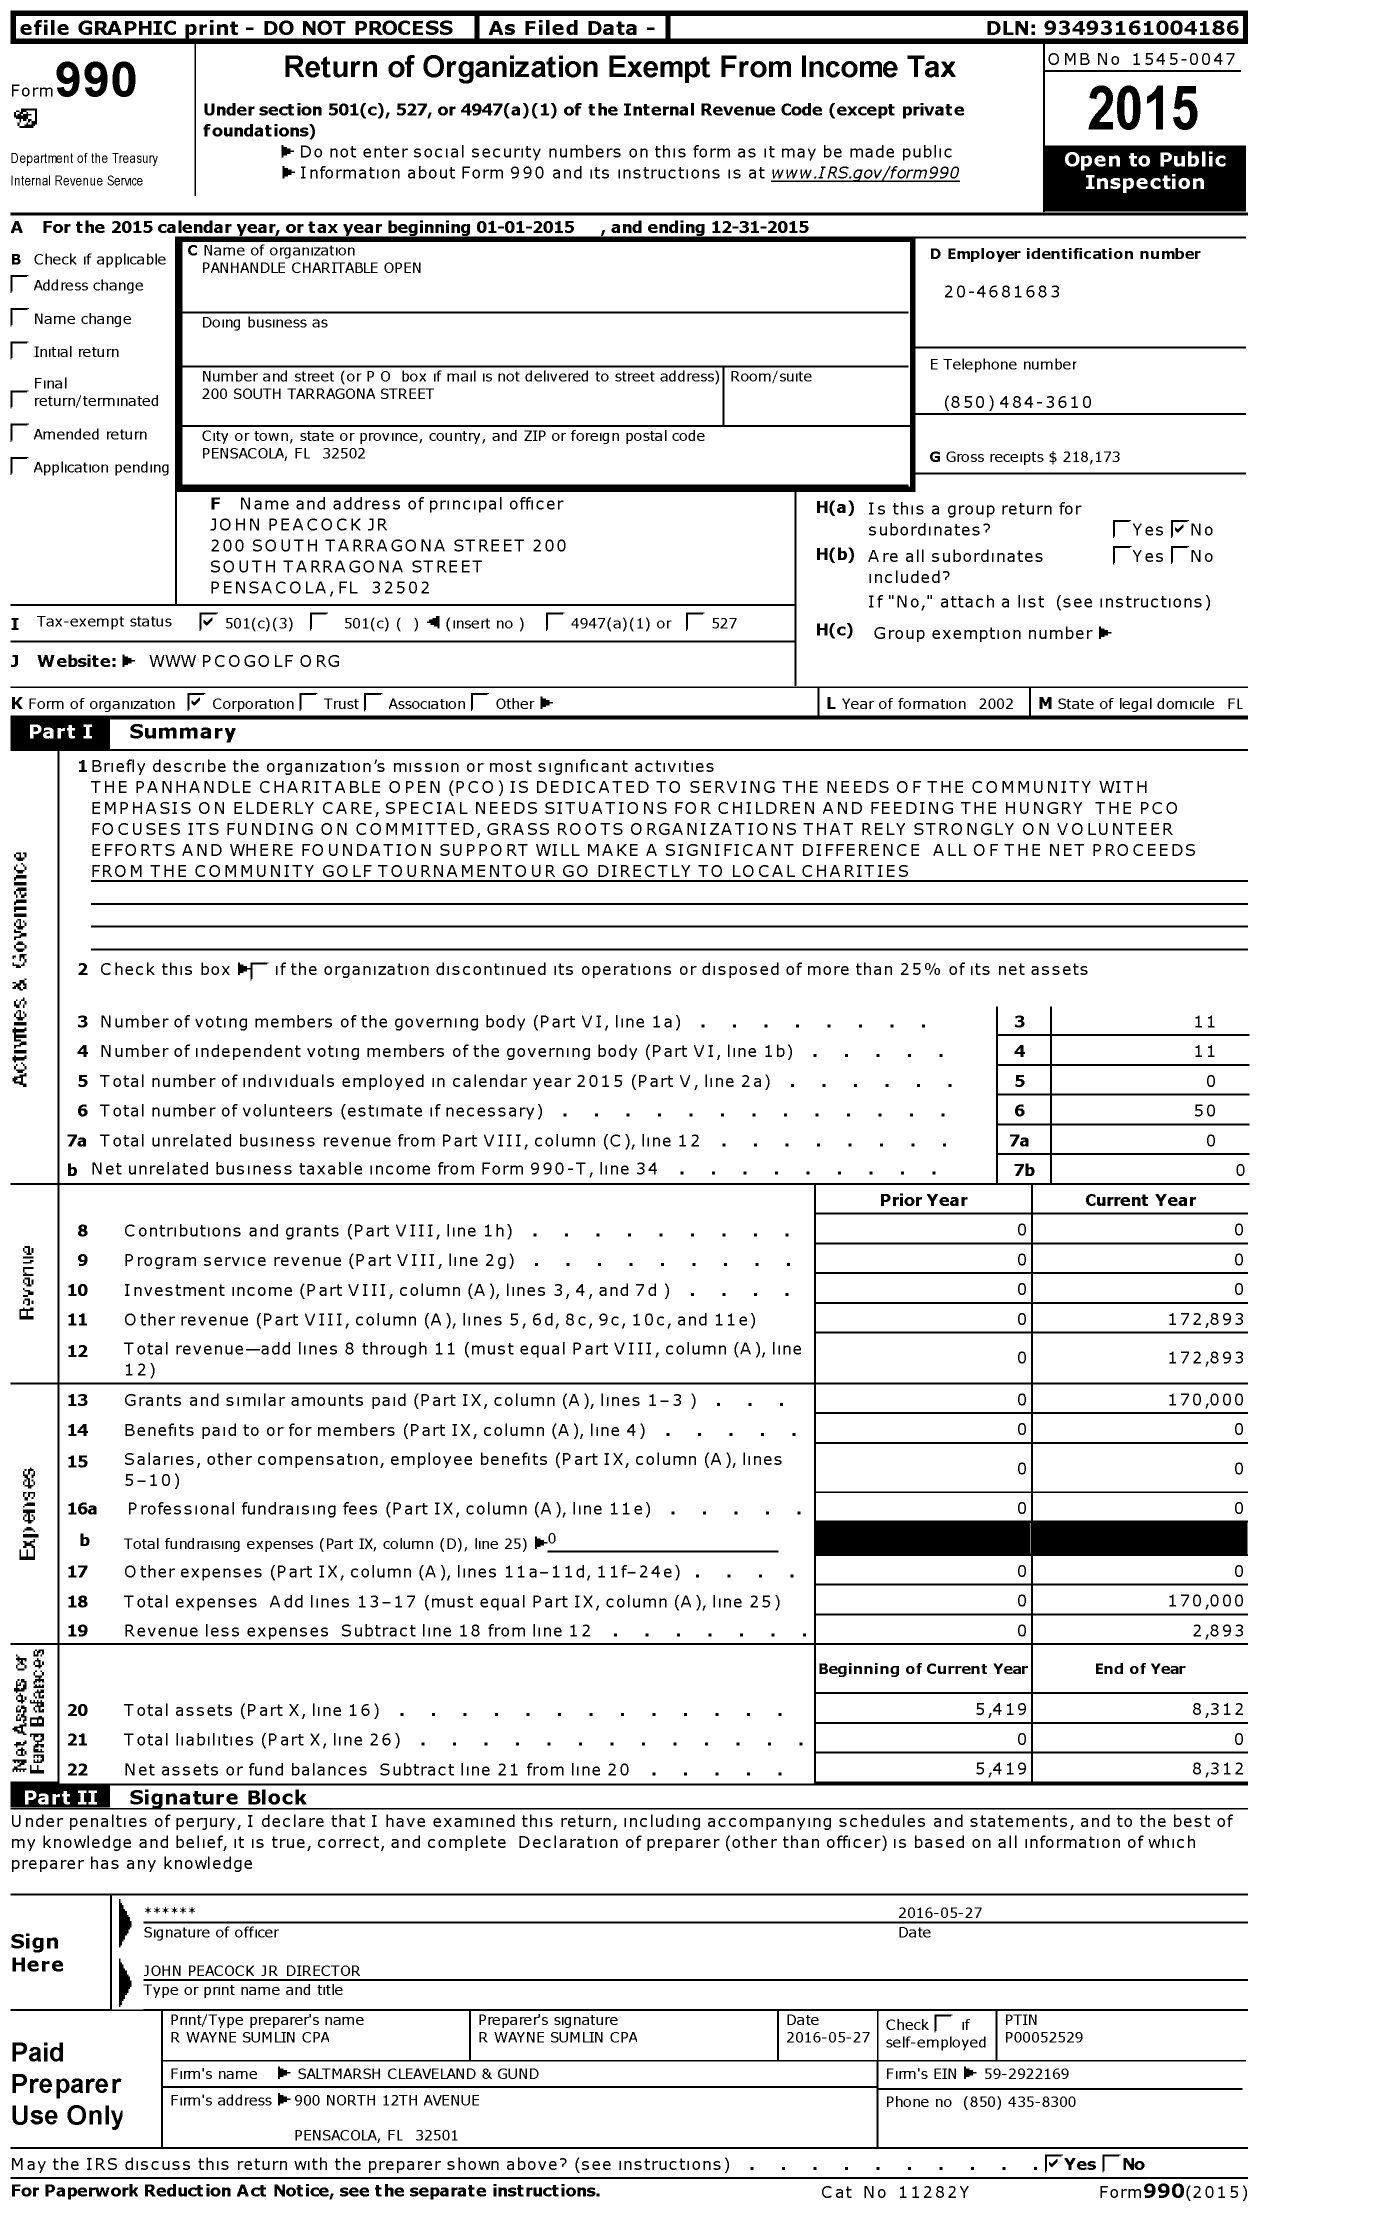 Image of first page of 2015 Form 990 for Panhandle Charitable Open